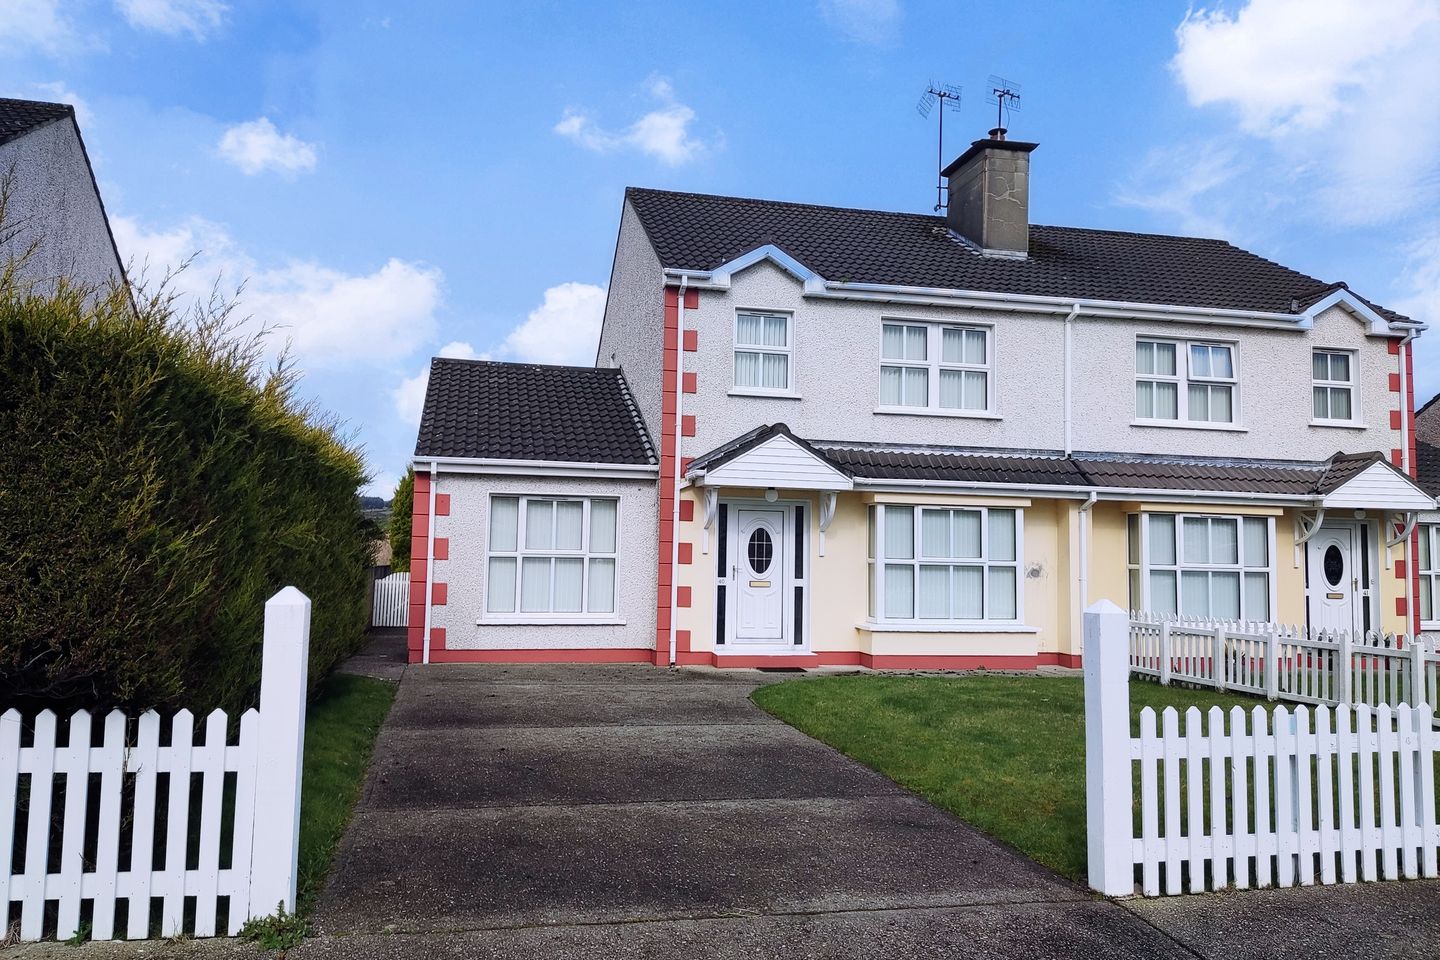 40 Glenoughty Close, Letterkenny, Co. Donegal, F92X3X5